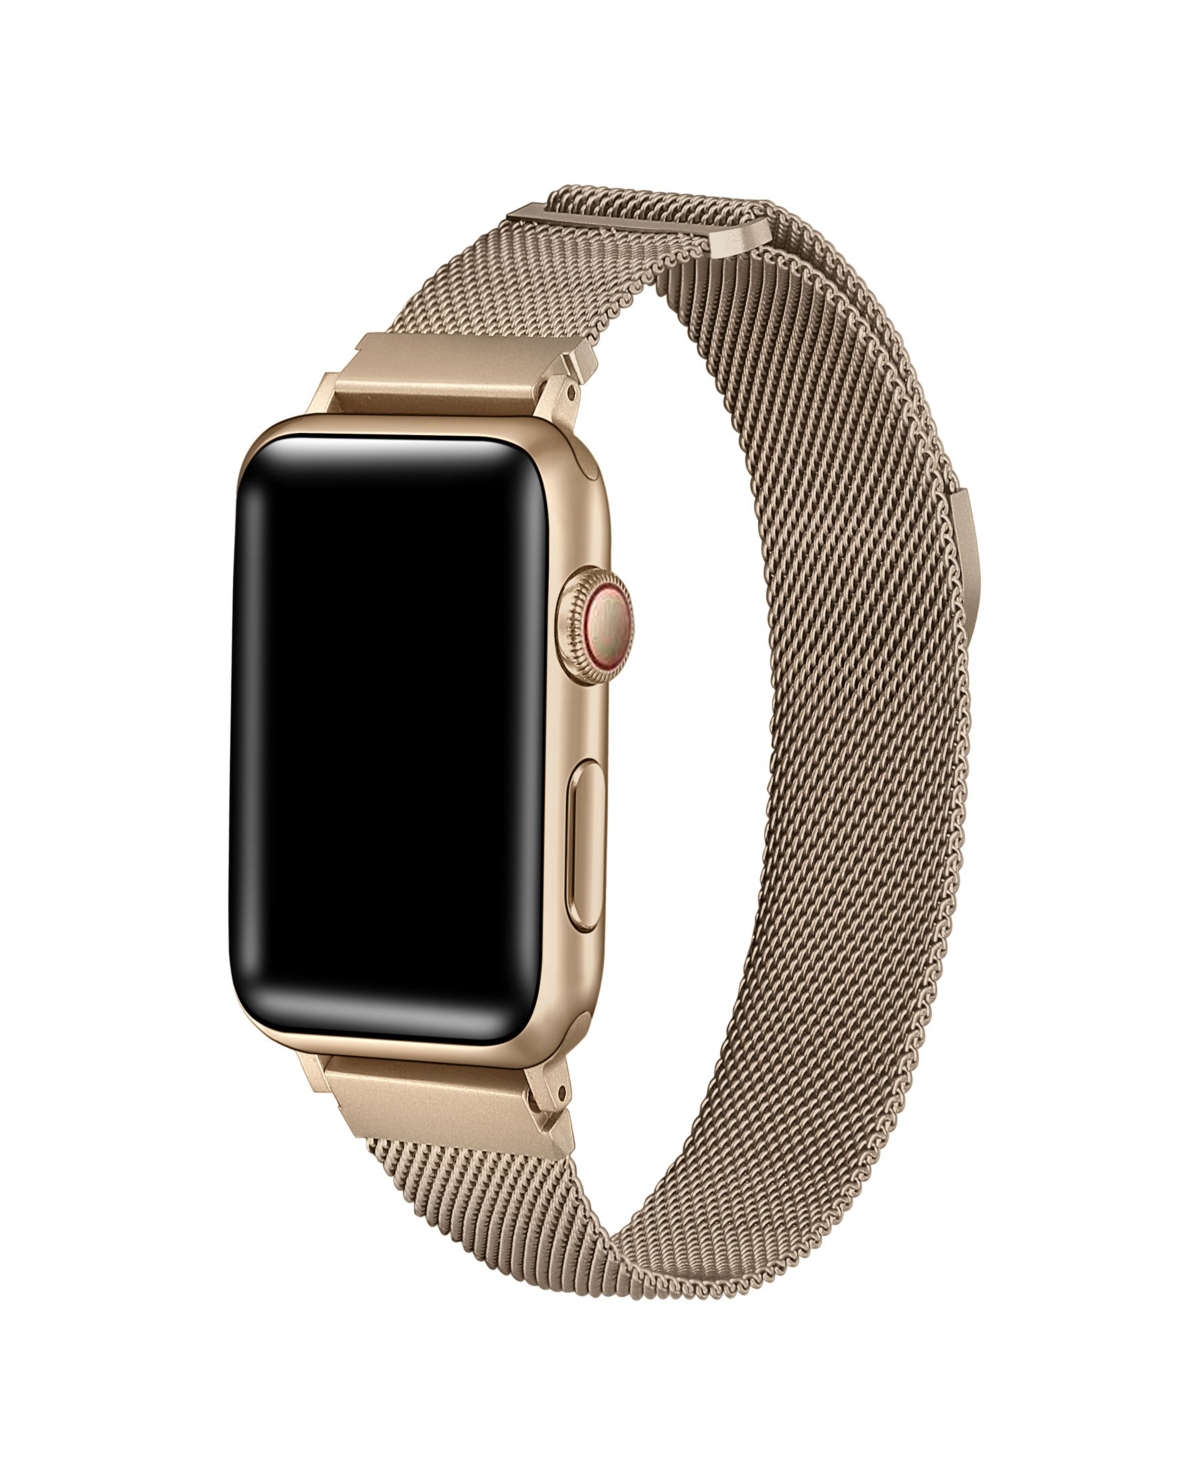 Unisex Skinny Infinity Stainless Steel Mesh Band for Apple Watch Size- 38mm, 40mm, 41mm - New Gold